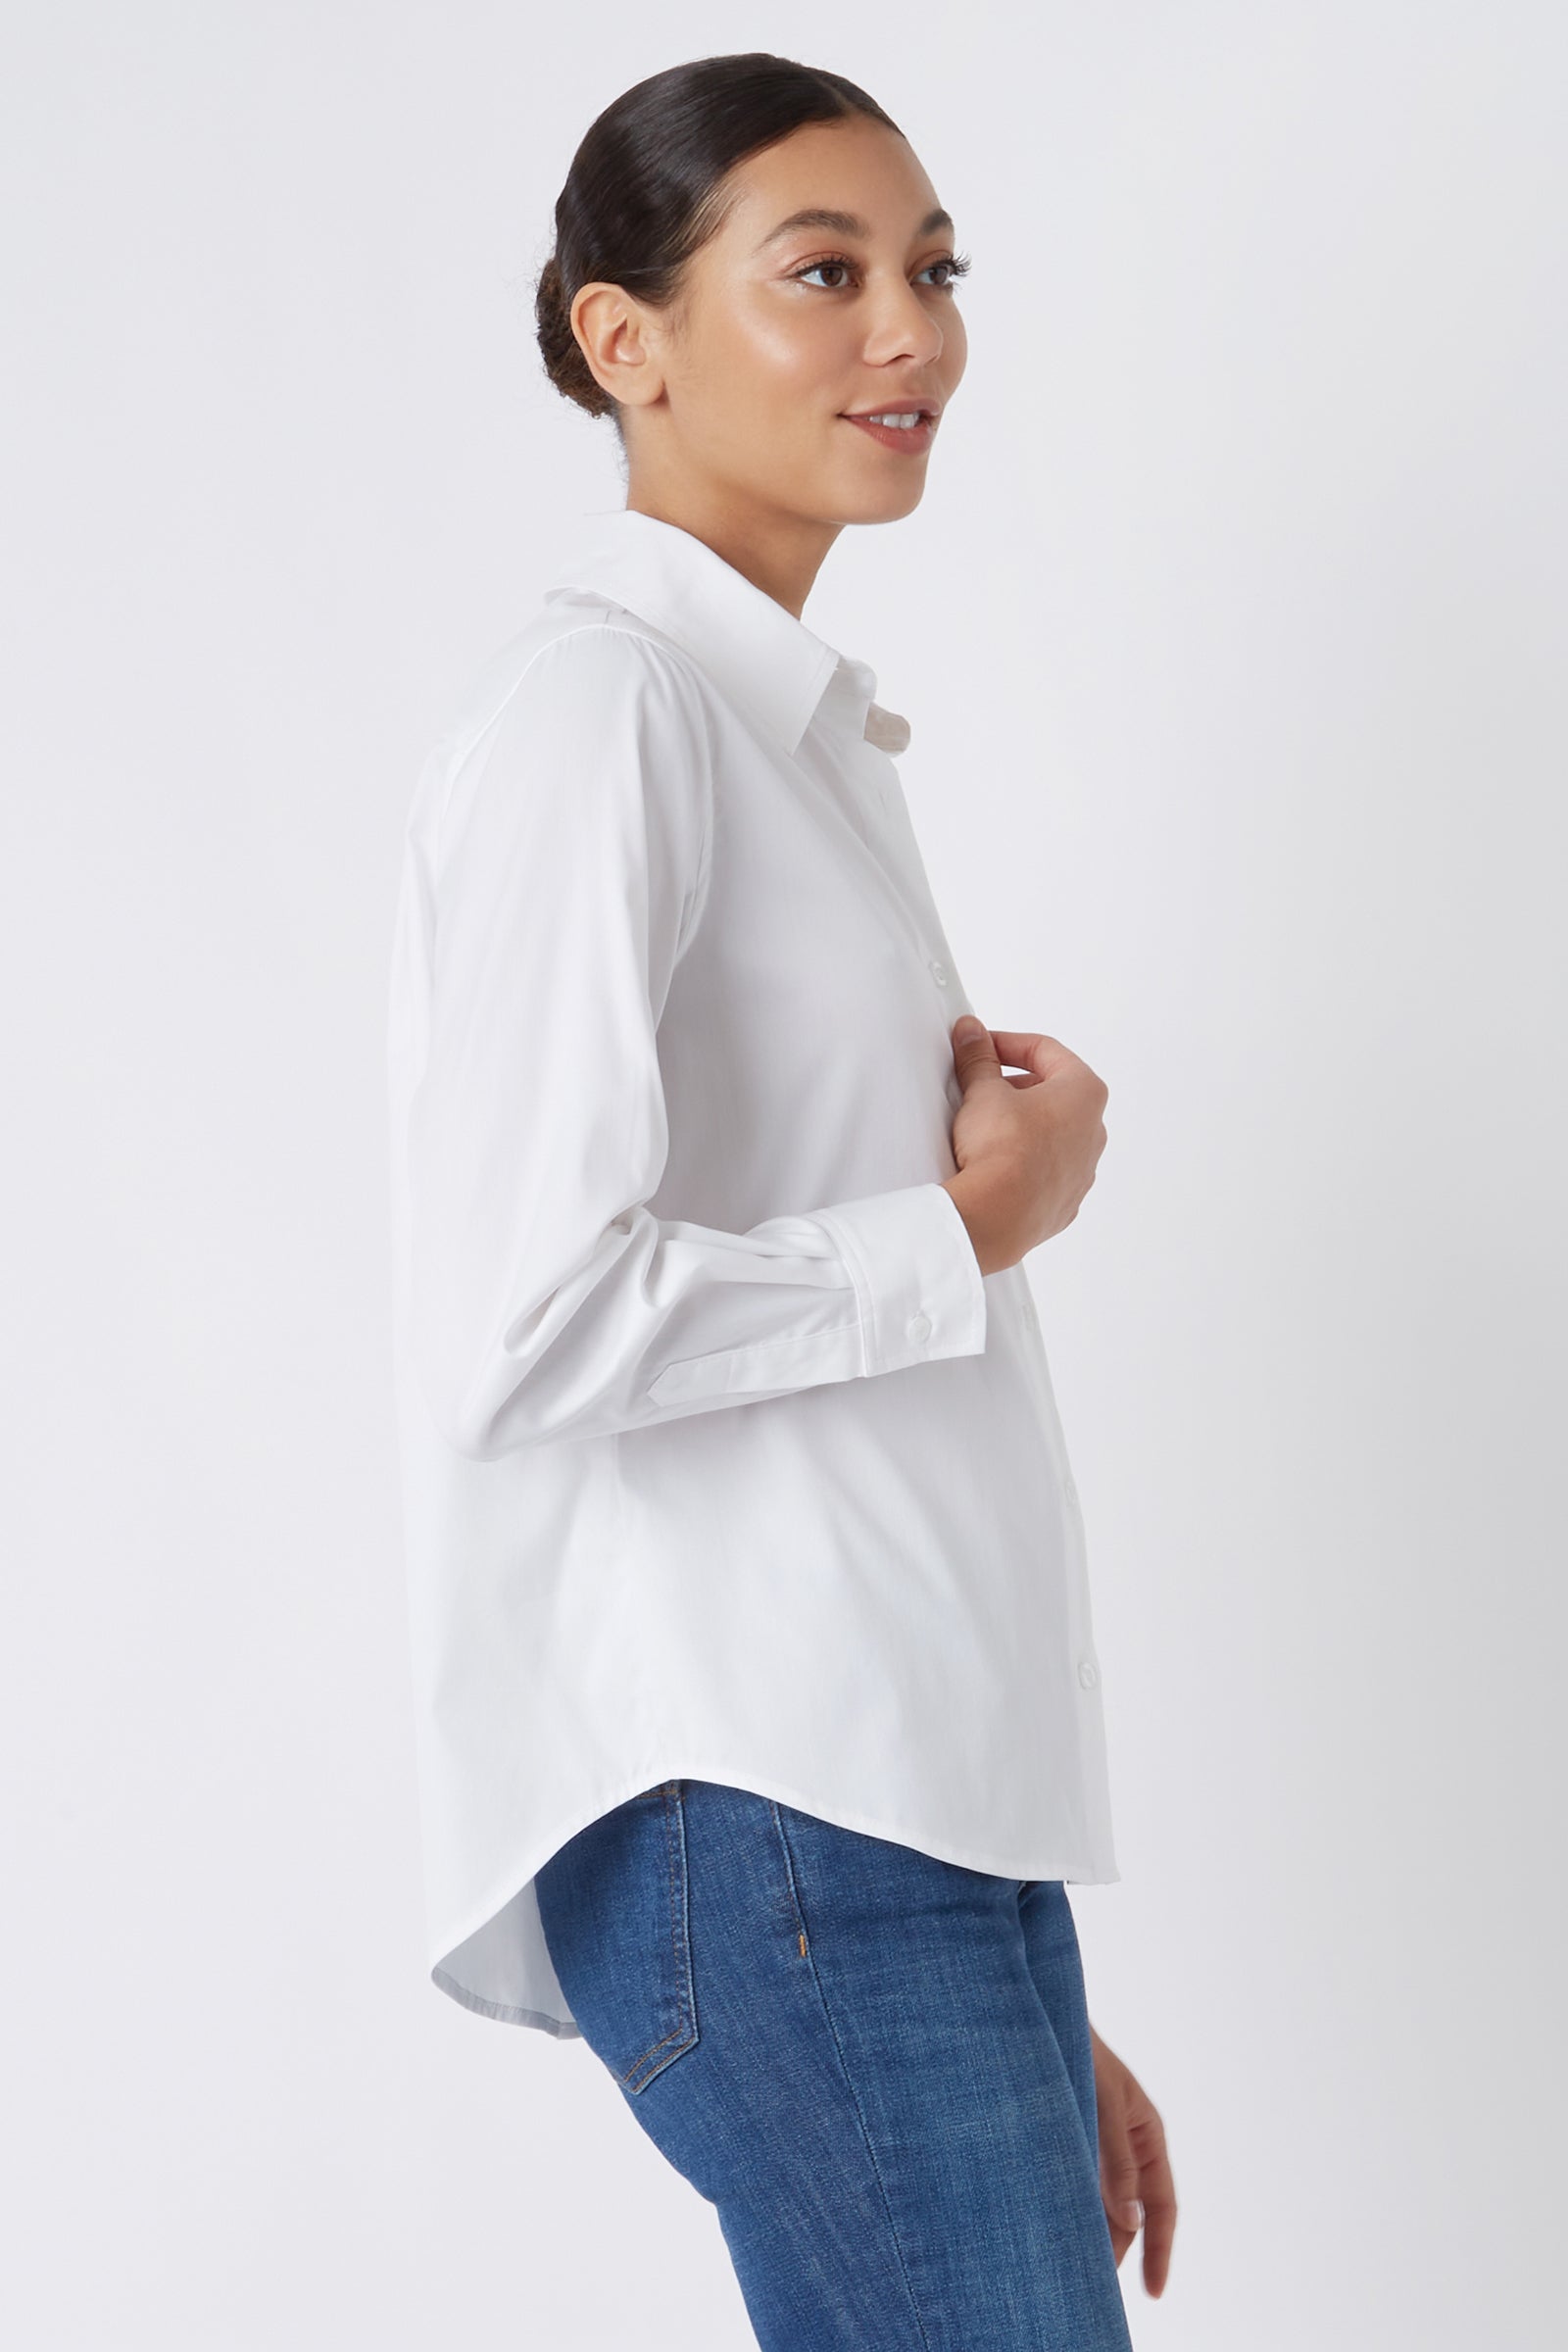 Kal Rieman Classic Tailored Shirt in White Pinpoint Oxford on Model Touching Shirt Cropped Side View